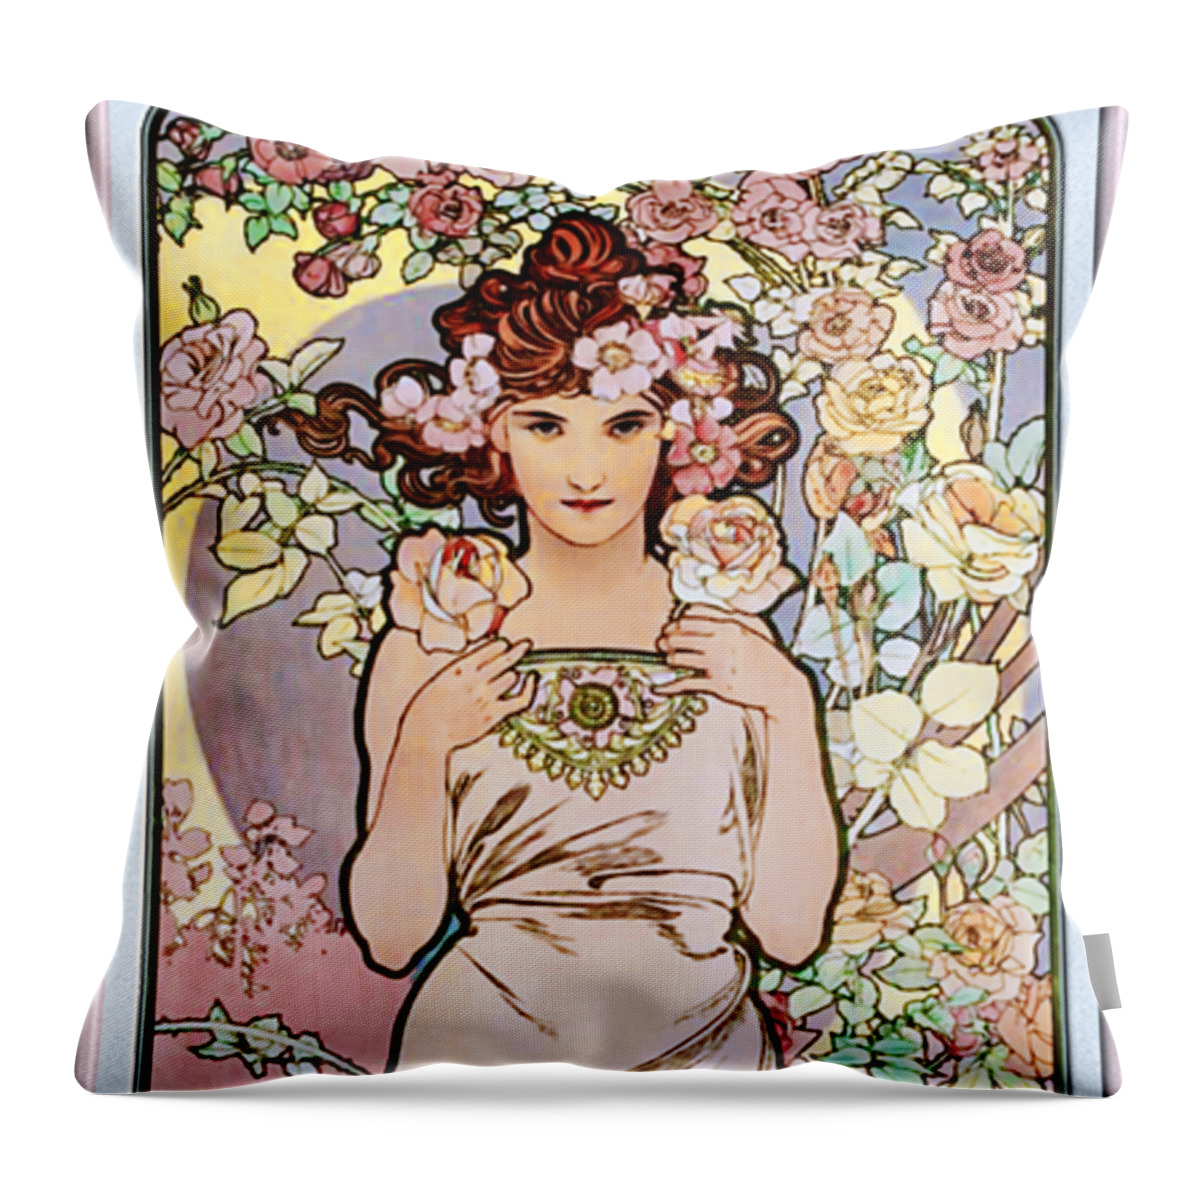 Rose Throw Pillow featuring the painting Rose by Alphonse Mucha by Rolando Burbon